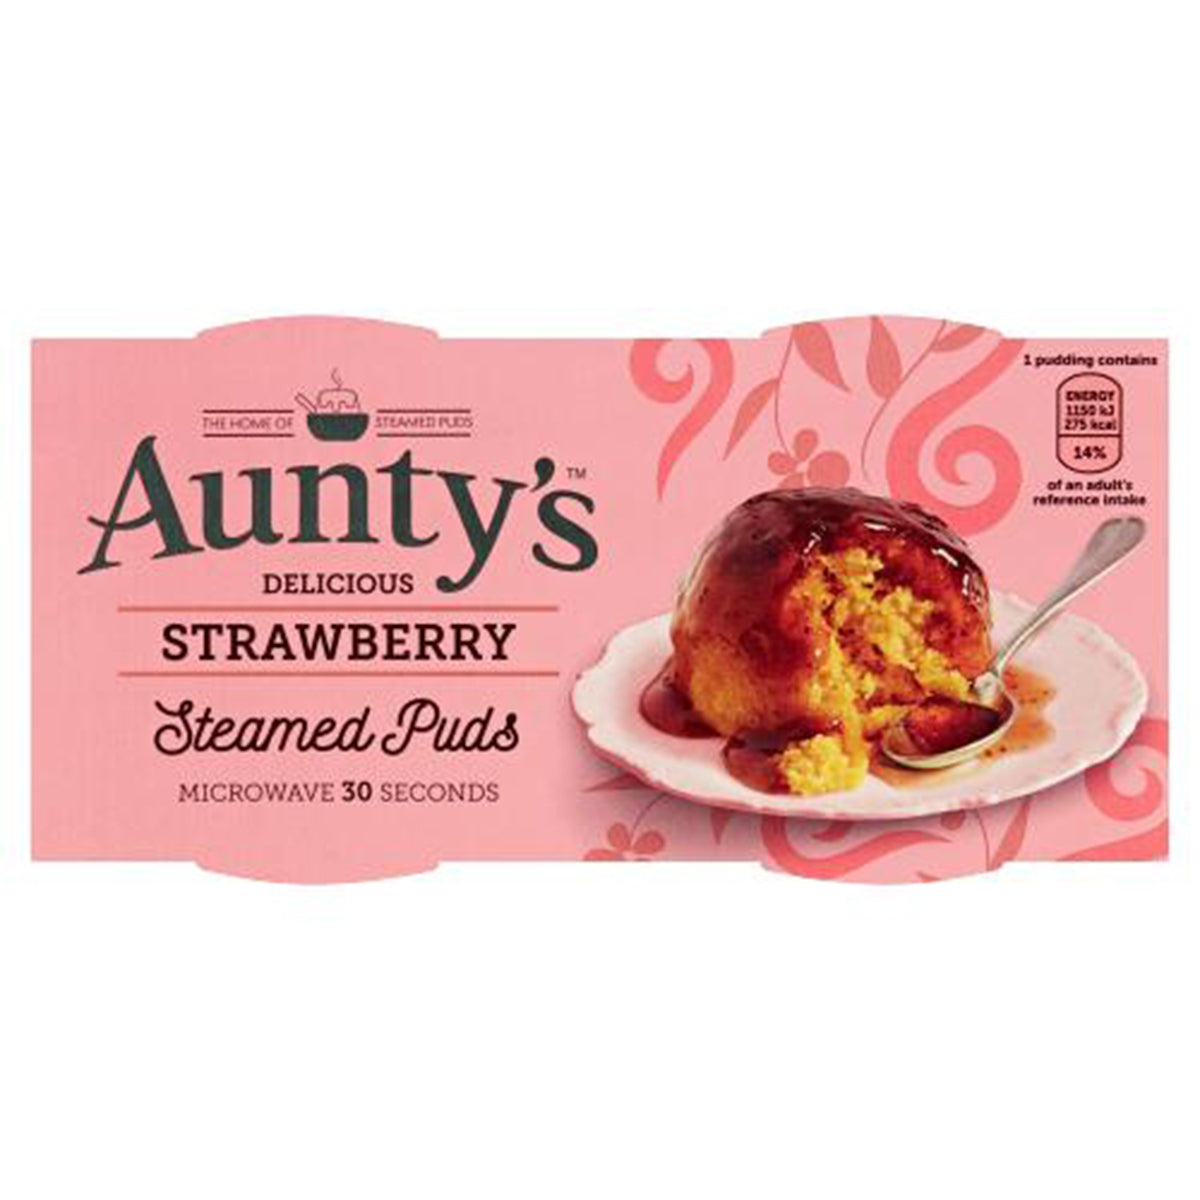 Packaging for Aunty's Delicious Strawberry Steamed Puds - 190g, ready in 30 seconds in the microwave.